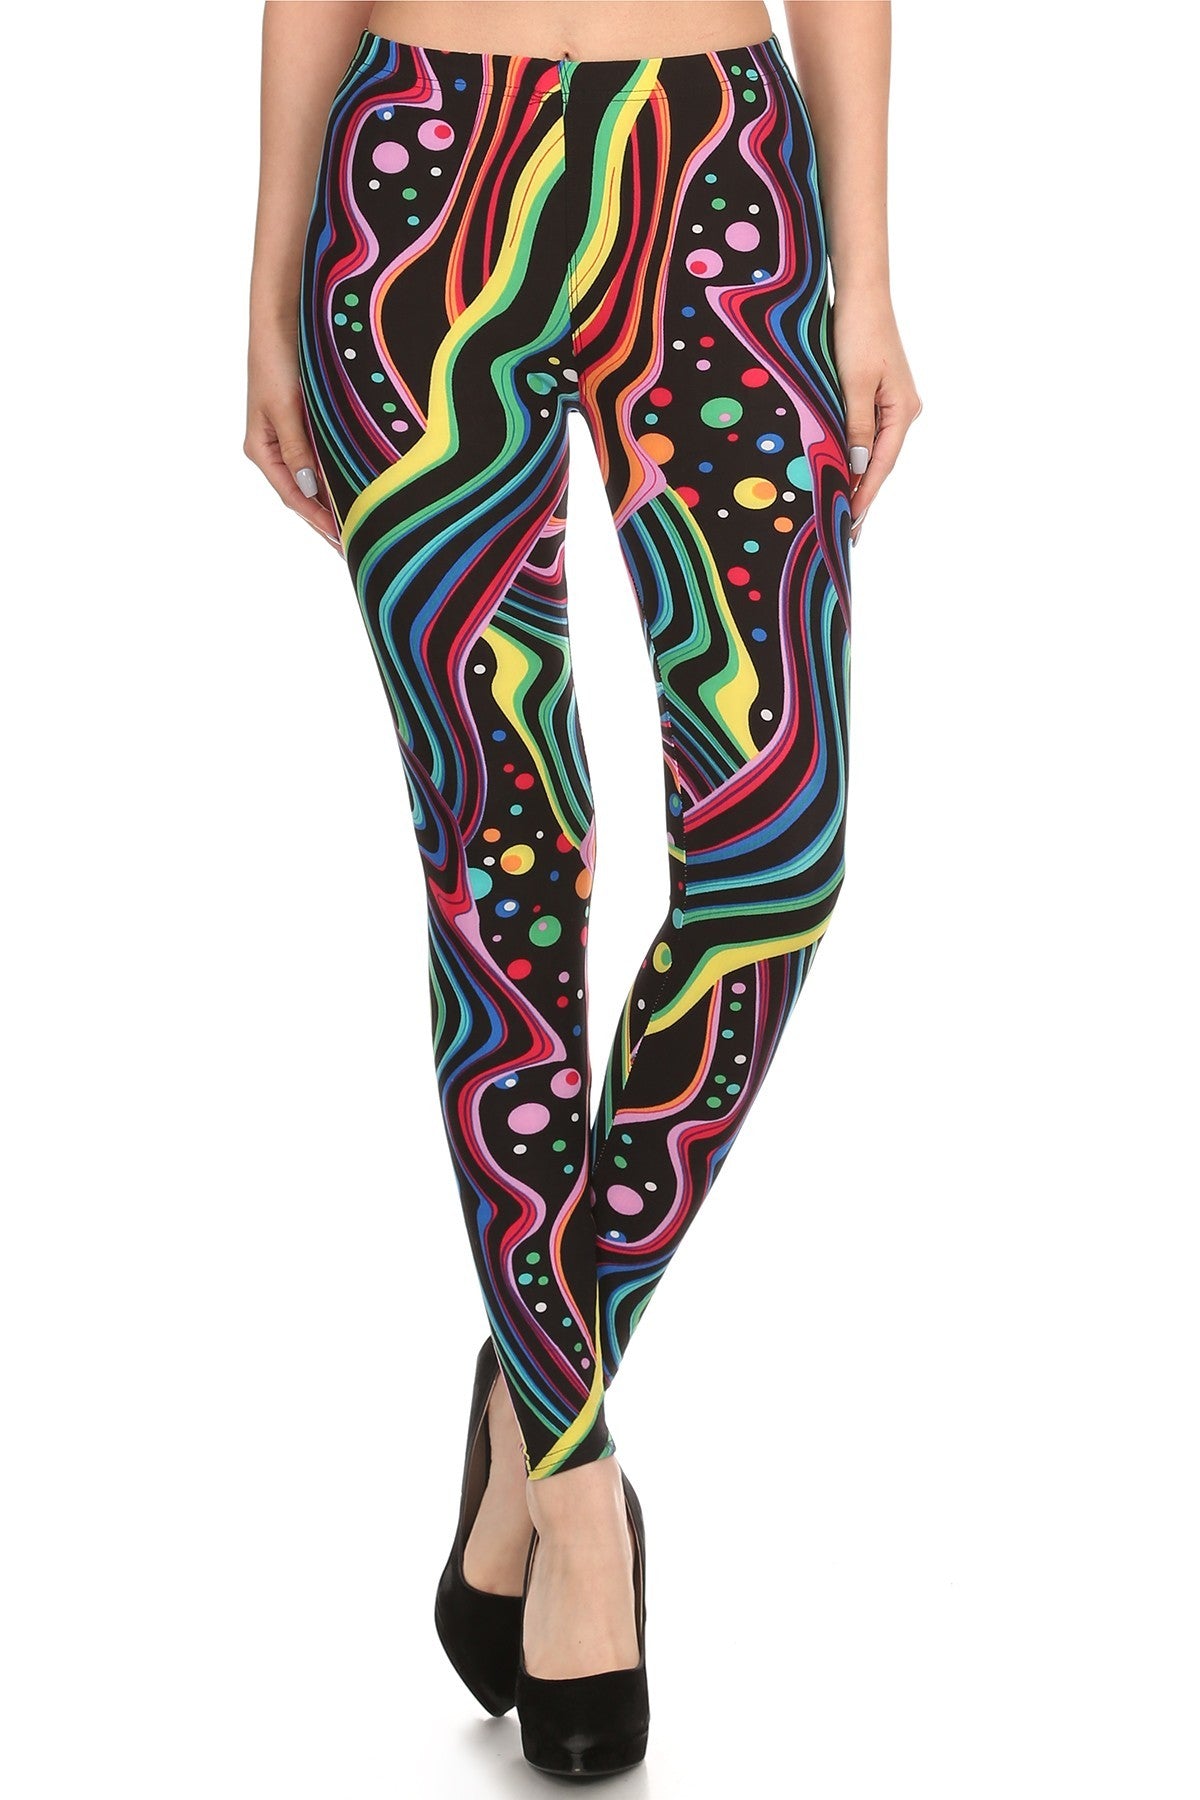 Colorful Abstract 1980s Shapes Print Costume Party Leggings